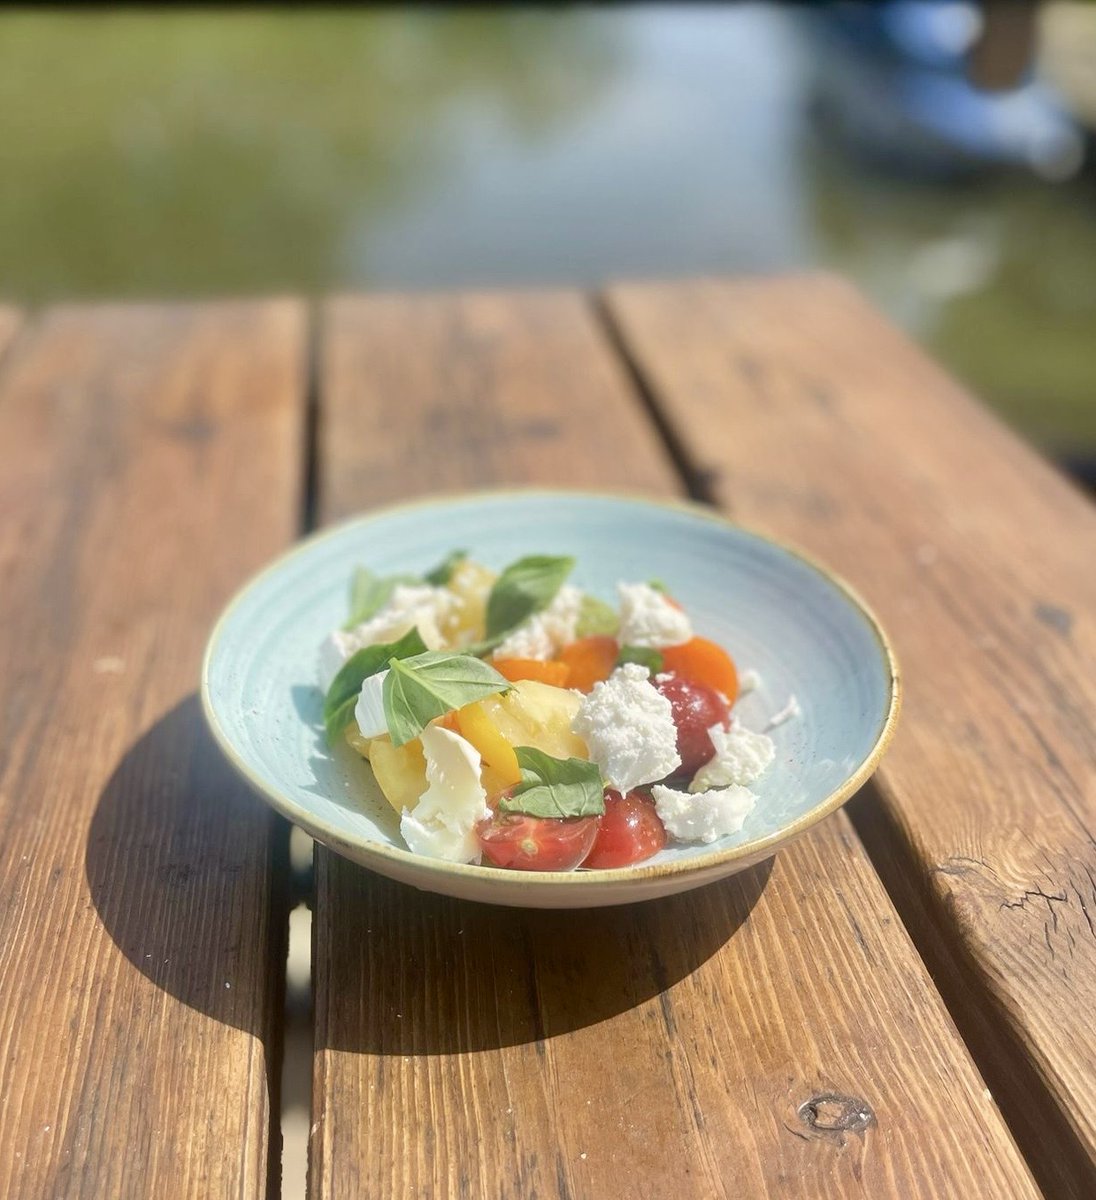 Our New Summer Special- Nutbourne tomato and Gaot's cheese salad 🤩 Book your table now to get to try this delicious new addition. 
@youngschefs @youngspubs #chertsey #riversidelunch